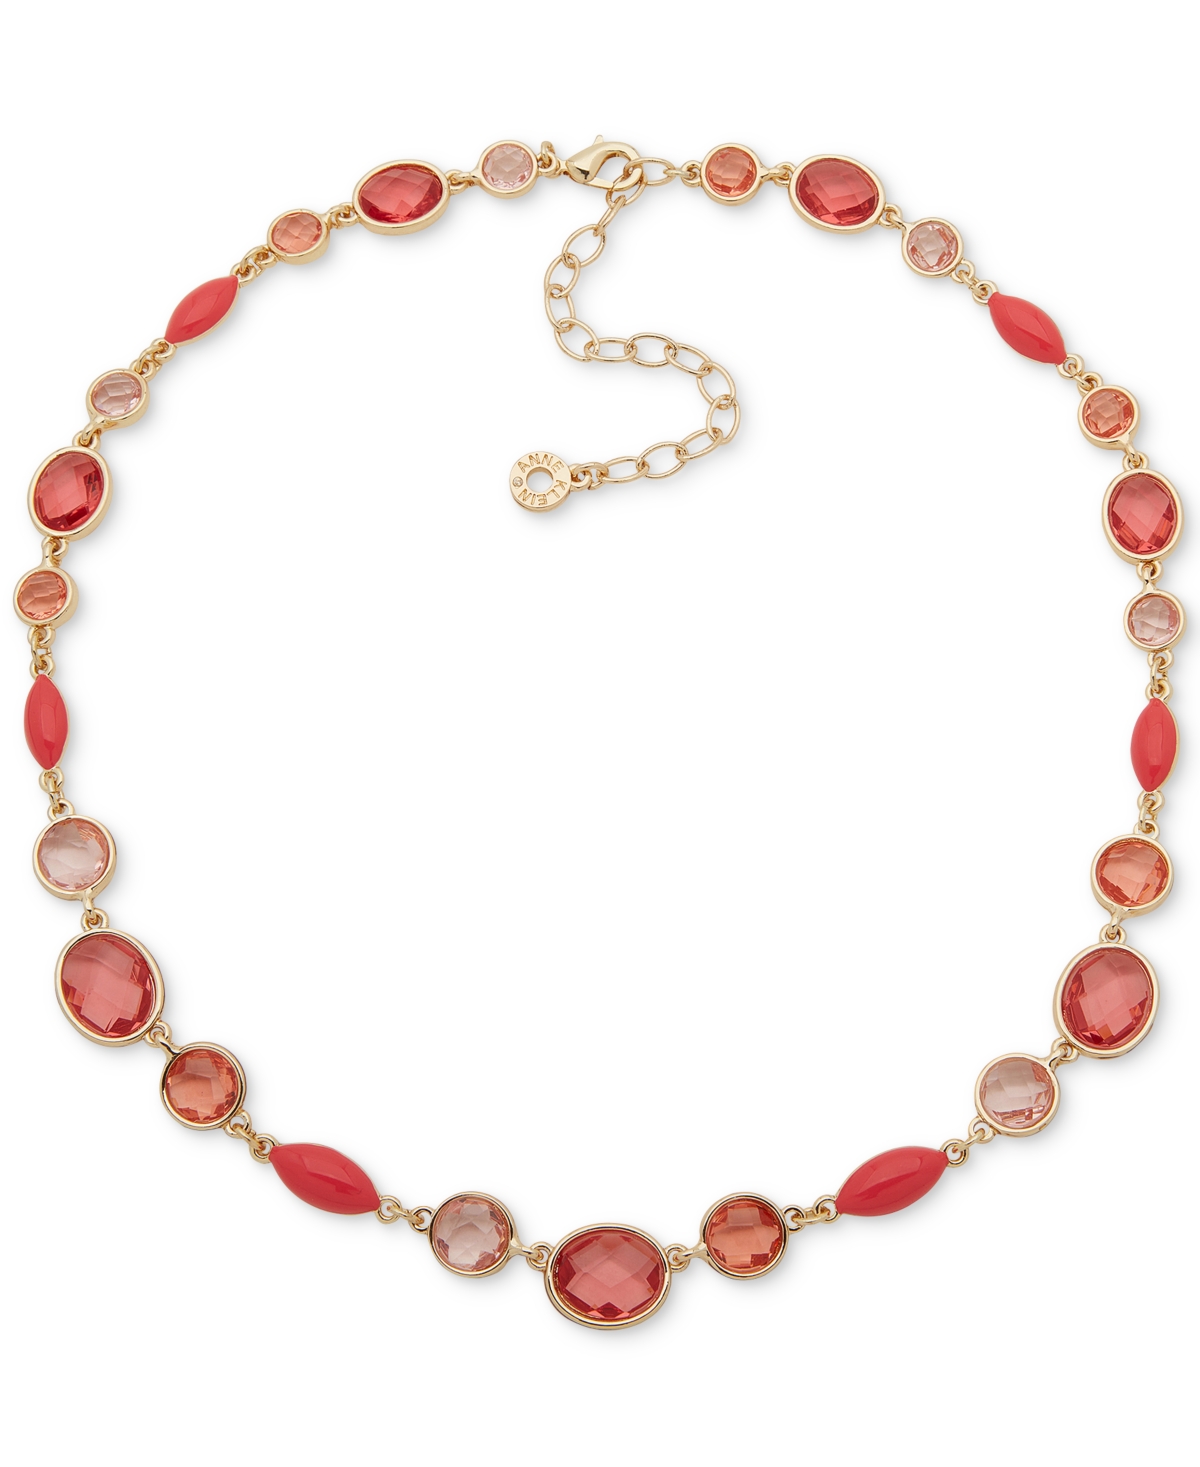 Gold-Tone Stone Collar Necklace, 16" + 3" extender - White